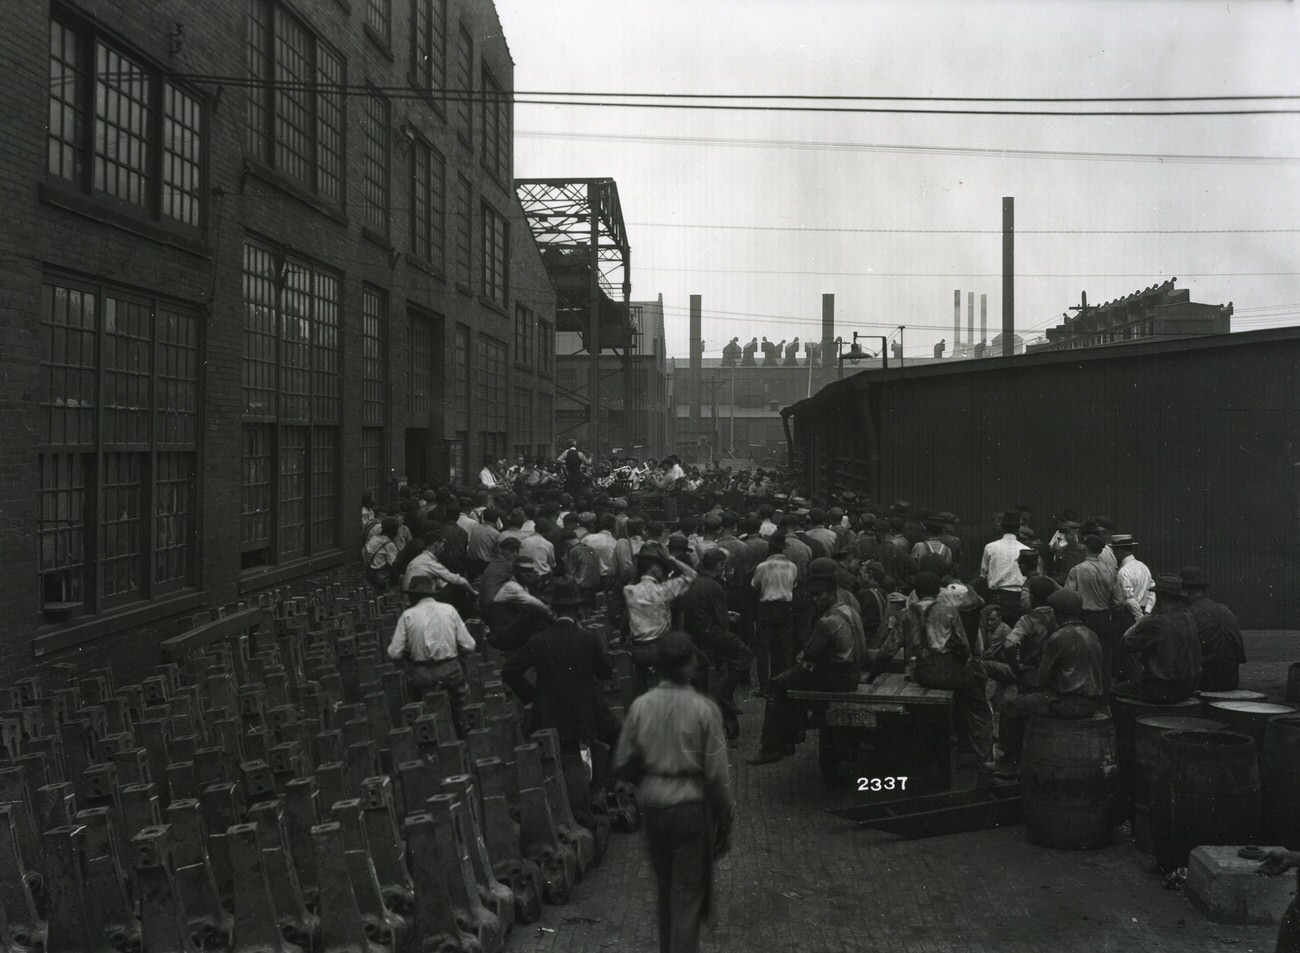 Buckeye Steel band at a social gathering, founded October 1902, located on Parsons Avenue, merged with Worthington Industries in 1980, 1920s